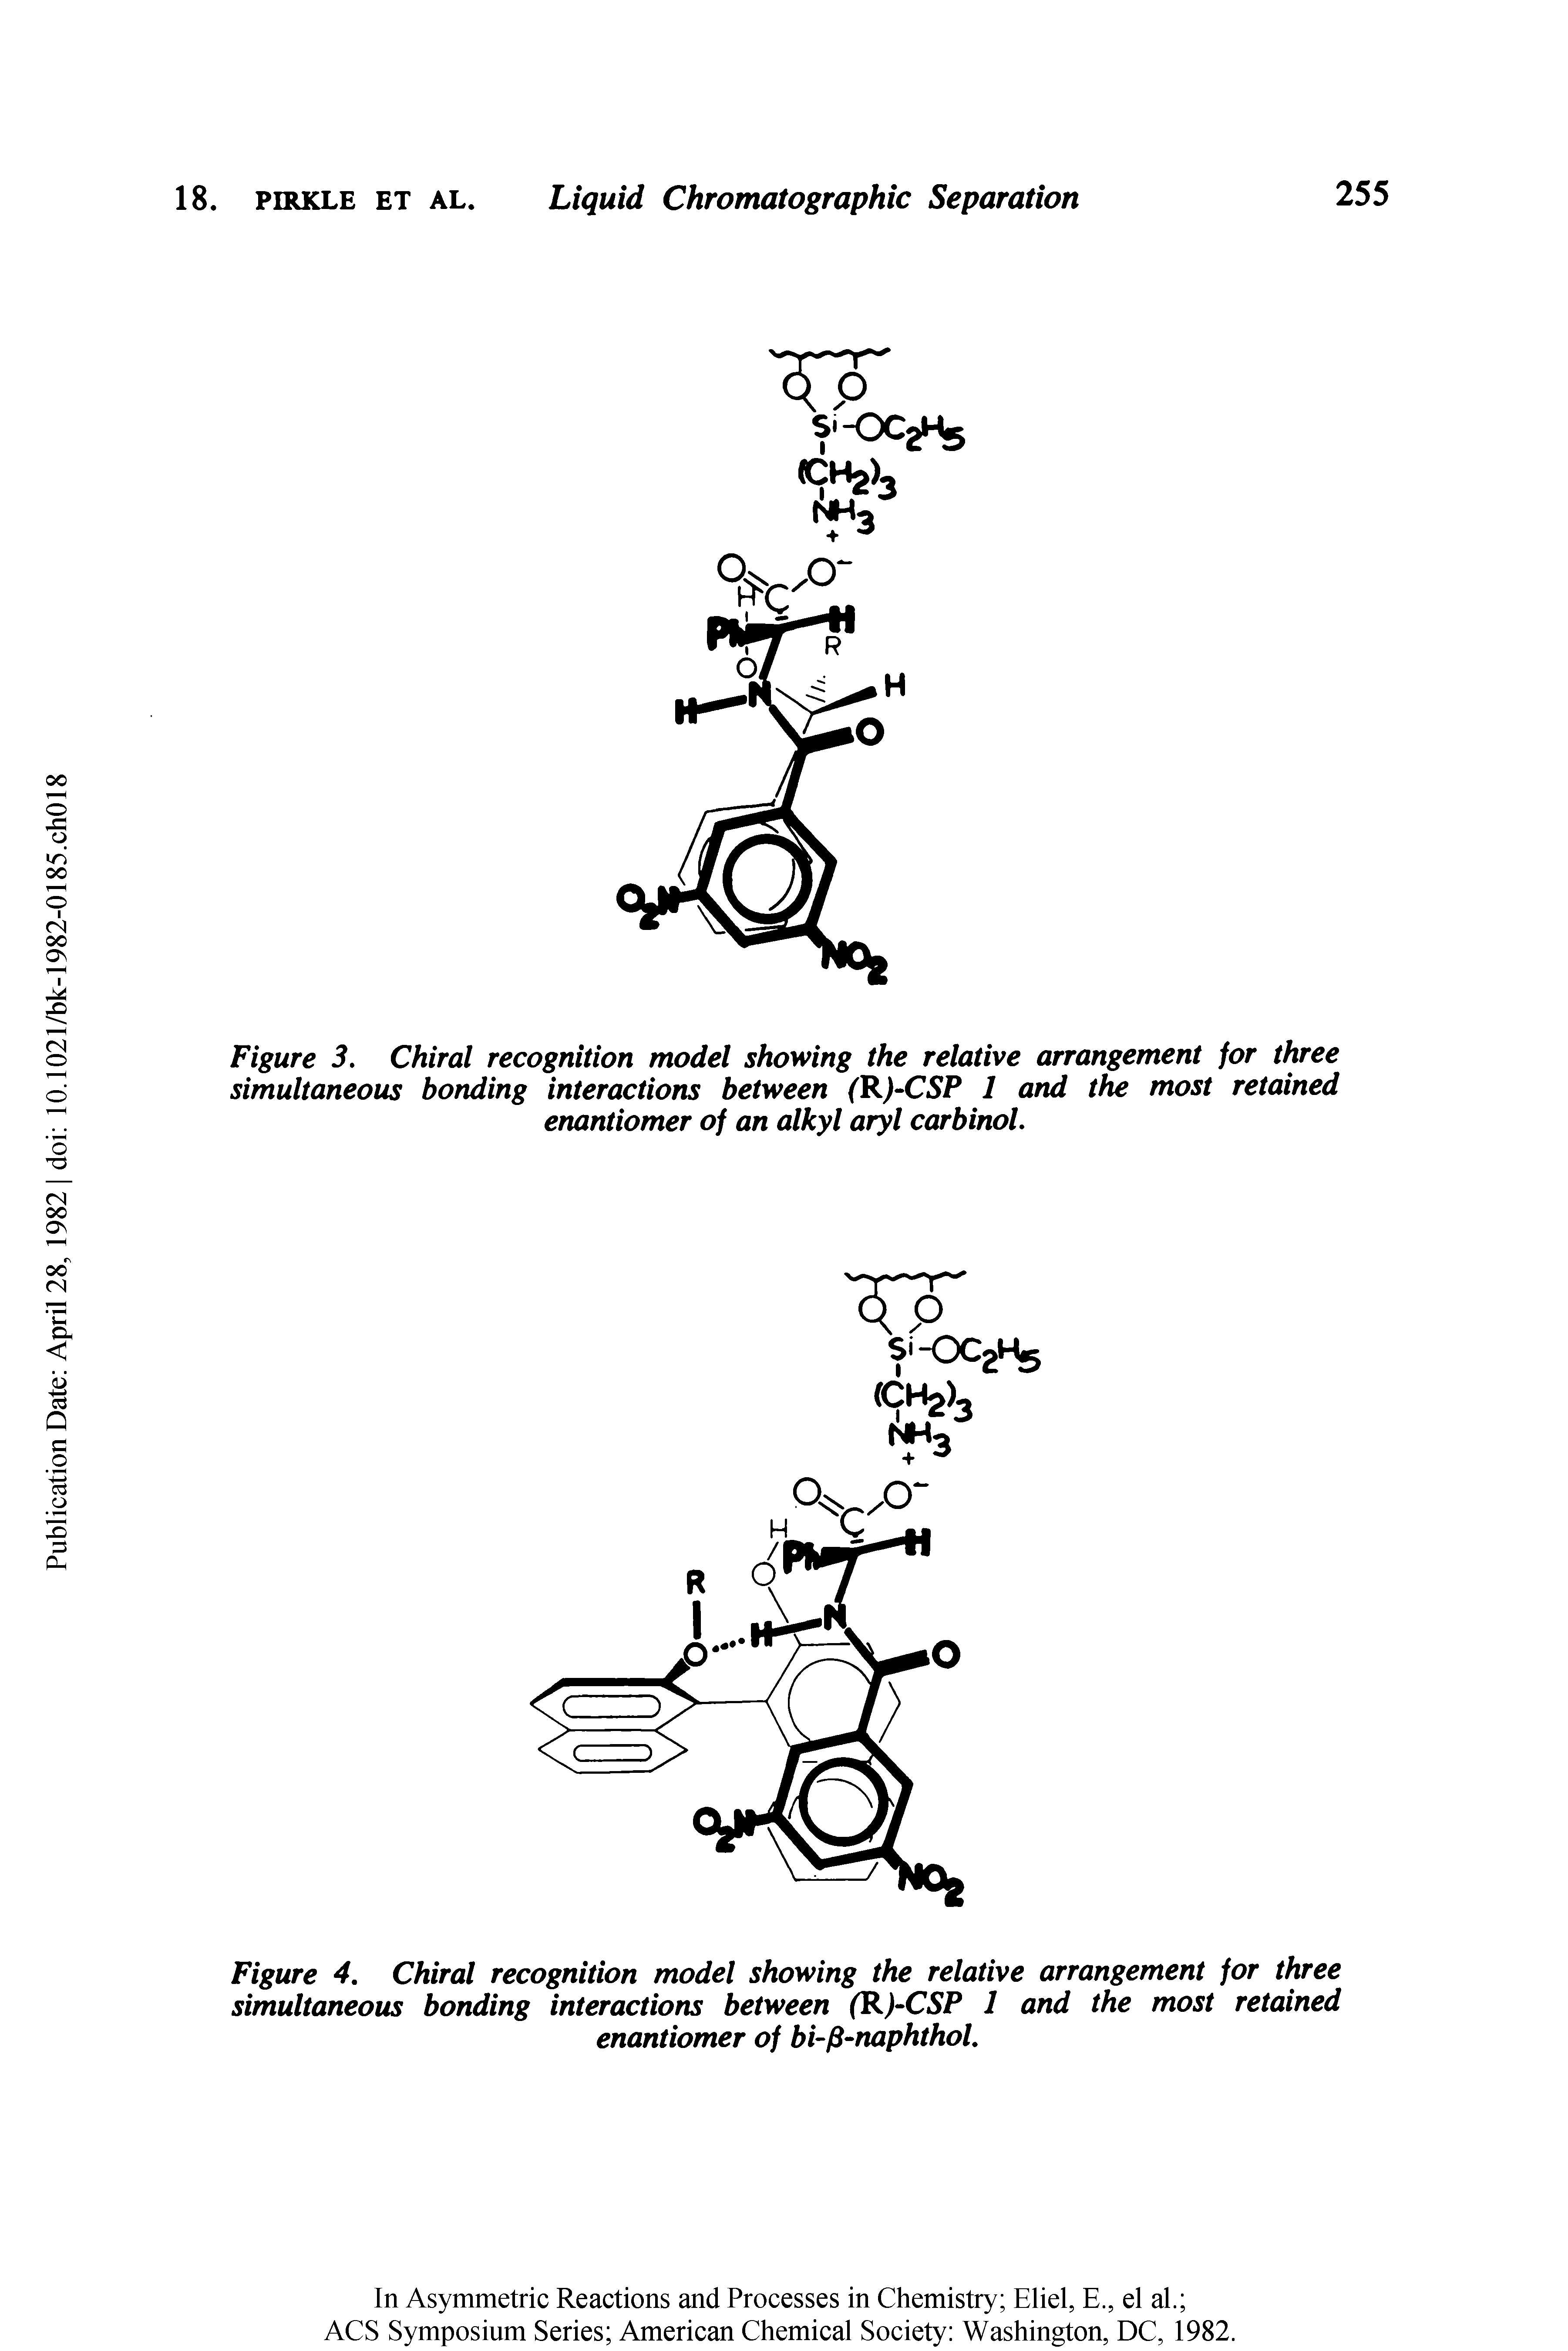 Figure 3. Chiral recognition model showing the relative arrangement for three simultaneous bonding interactions between (K)-CSP 1 and the most retained enantiomer of an alkyl aryl carbinol.